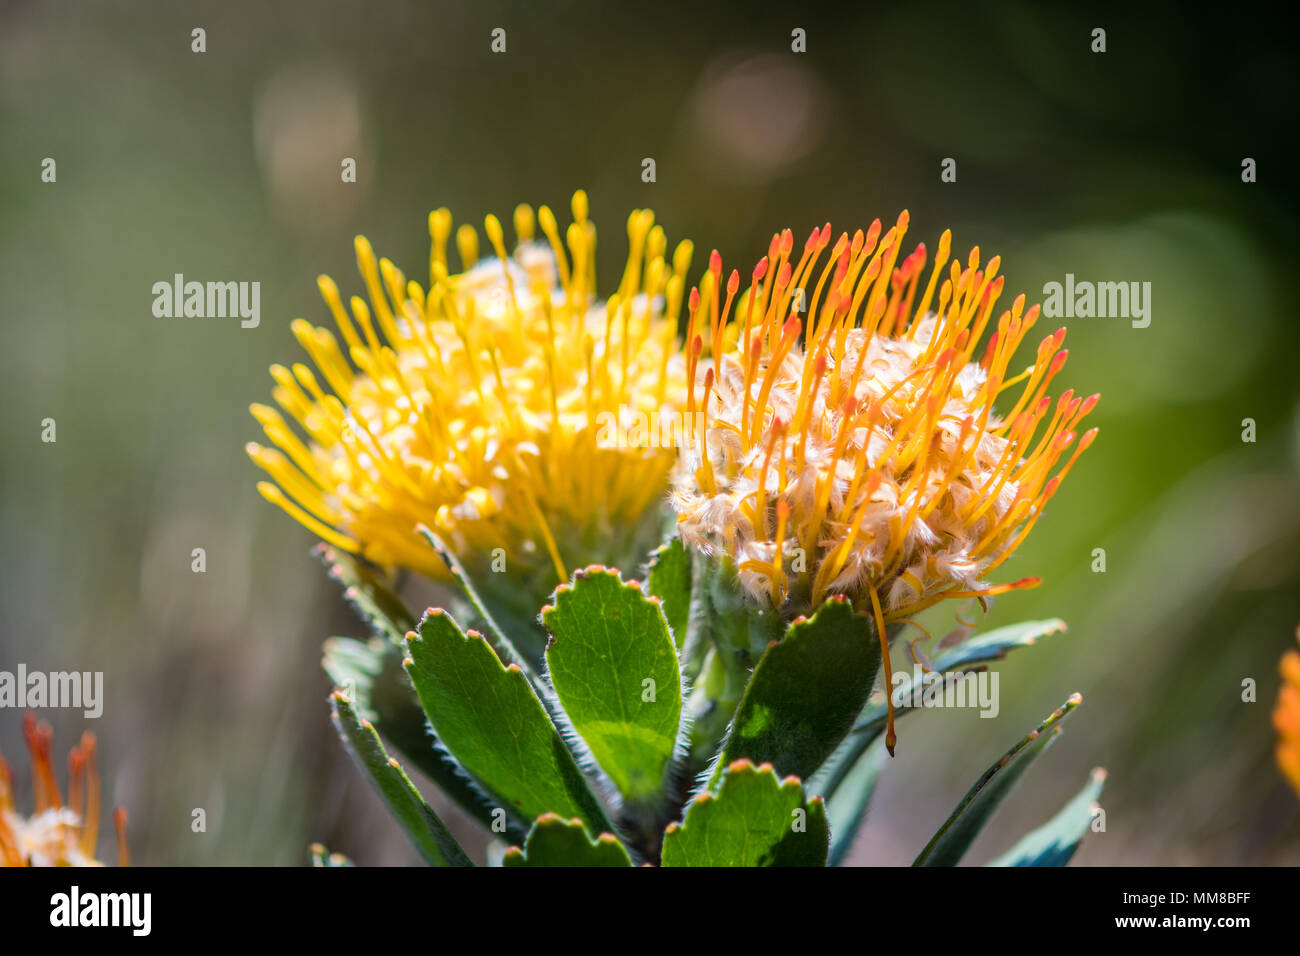 A close-up of pincushion protea at the Kirstenbosch Botanical Gardens in Cape Town, South Africa Stock Photo